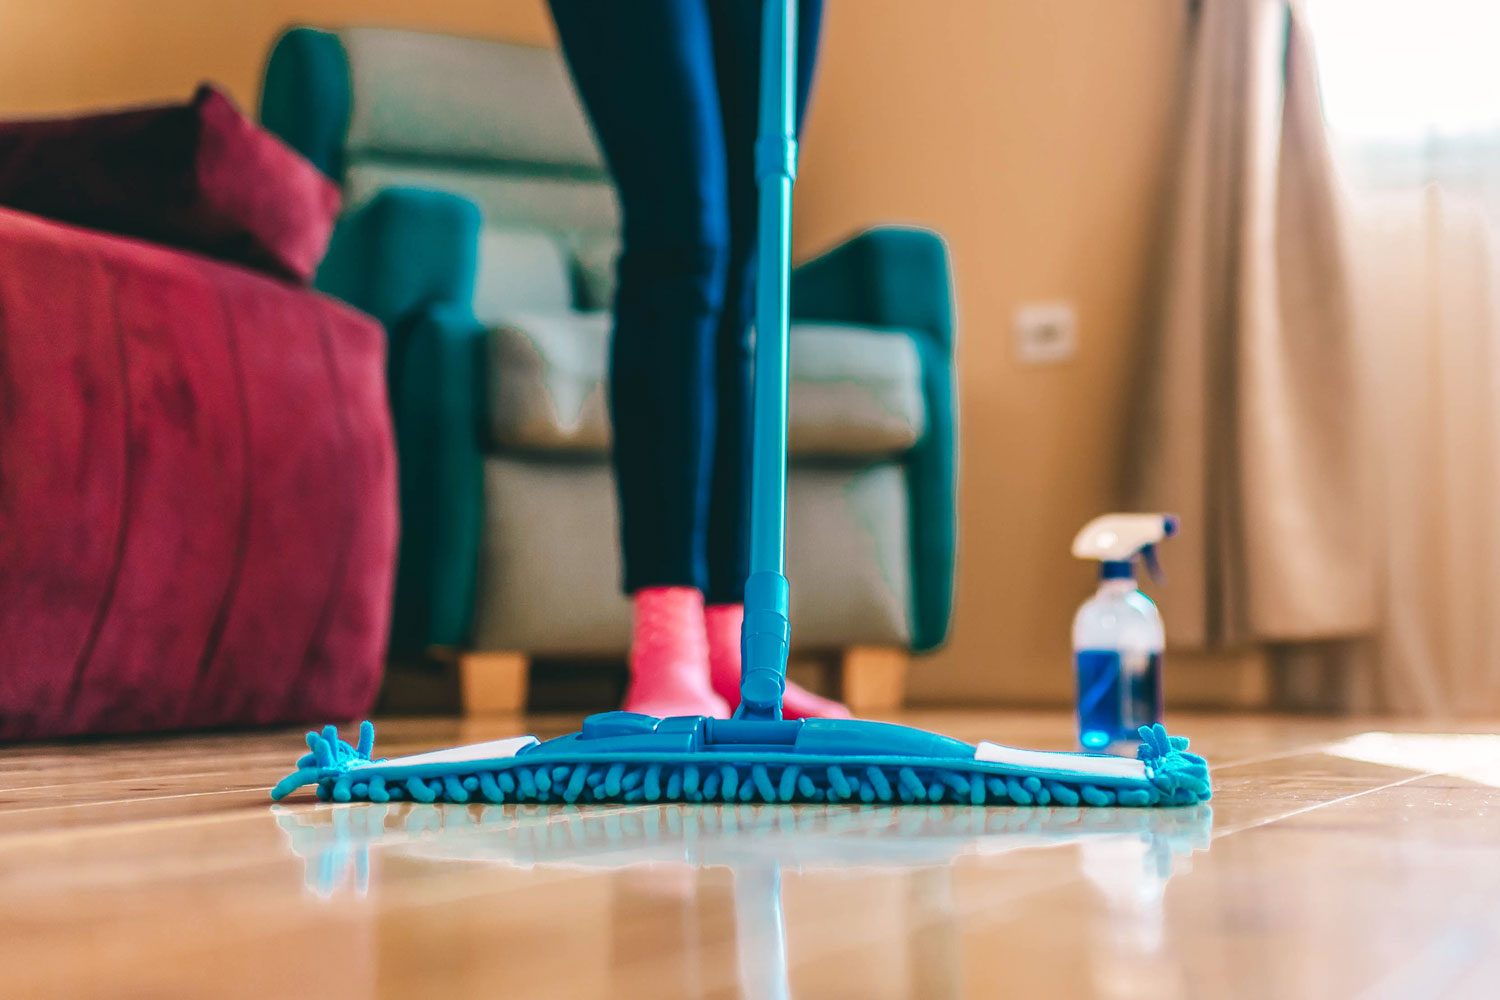 Young Woman Mopping Hardwood Floors with a Sponge Mop and Cleaning Supplies in the Background